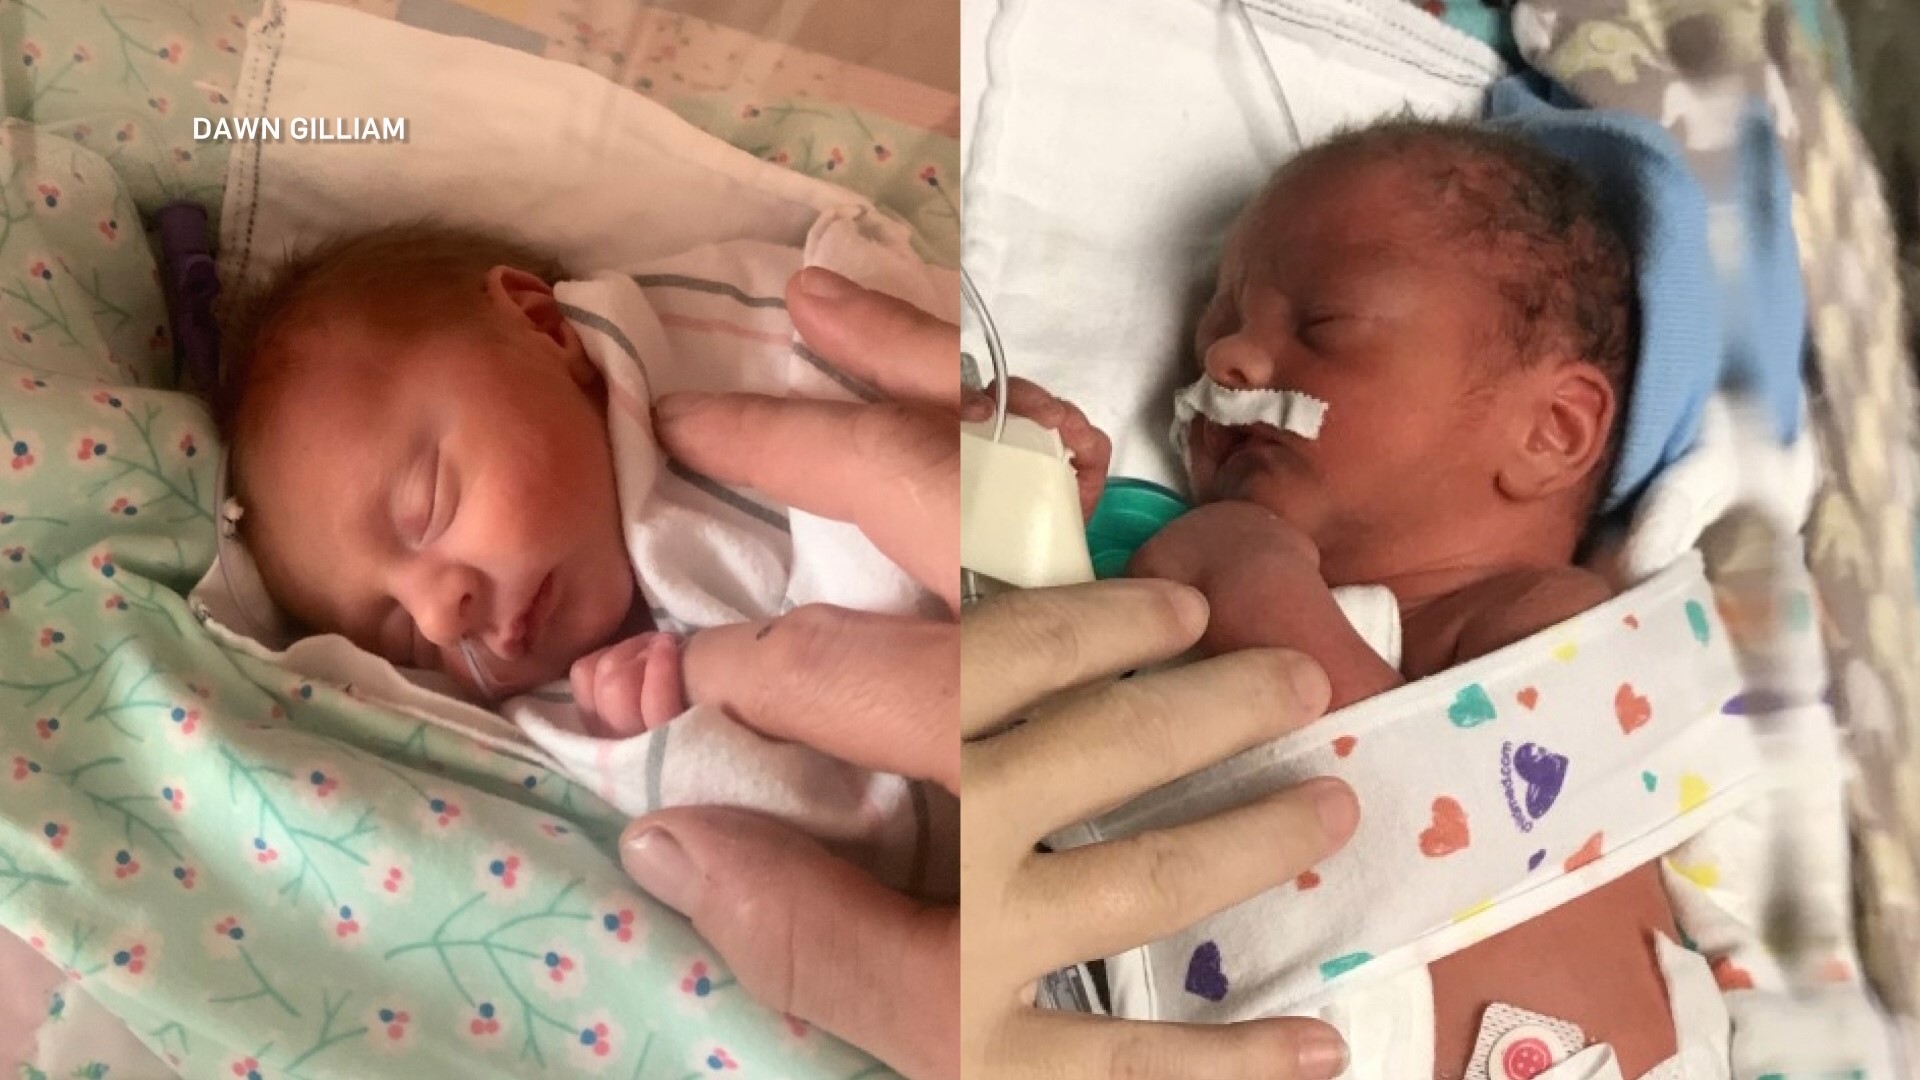 Joslyn and Jaxon are twins but don't share a birthday. Sister and brother were born in different decades this week at an Indiana hospital.